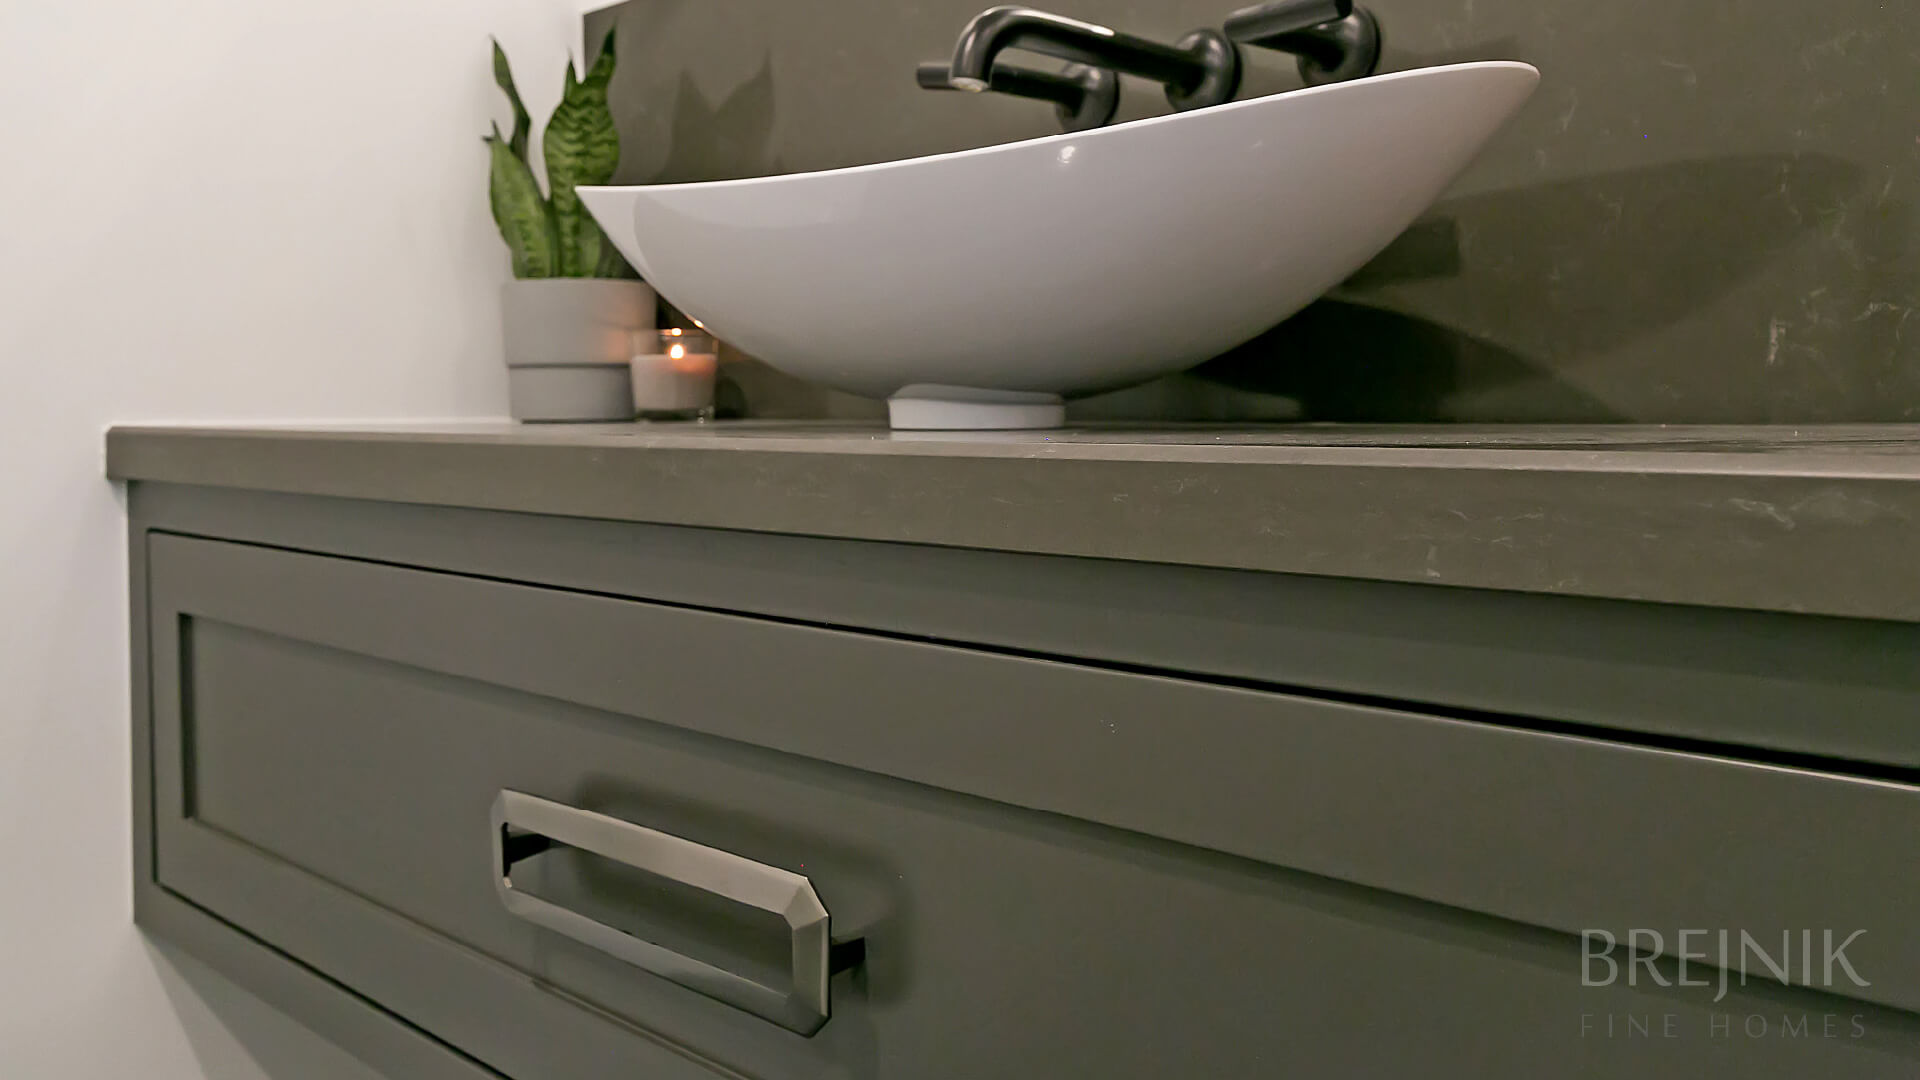 A detailed view with the bathroom counter